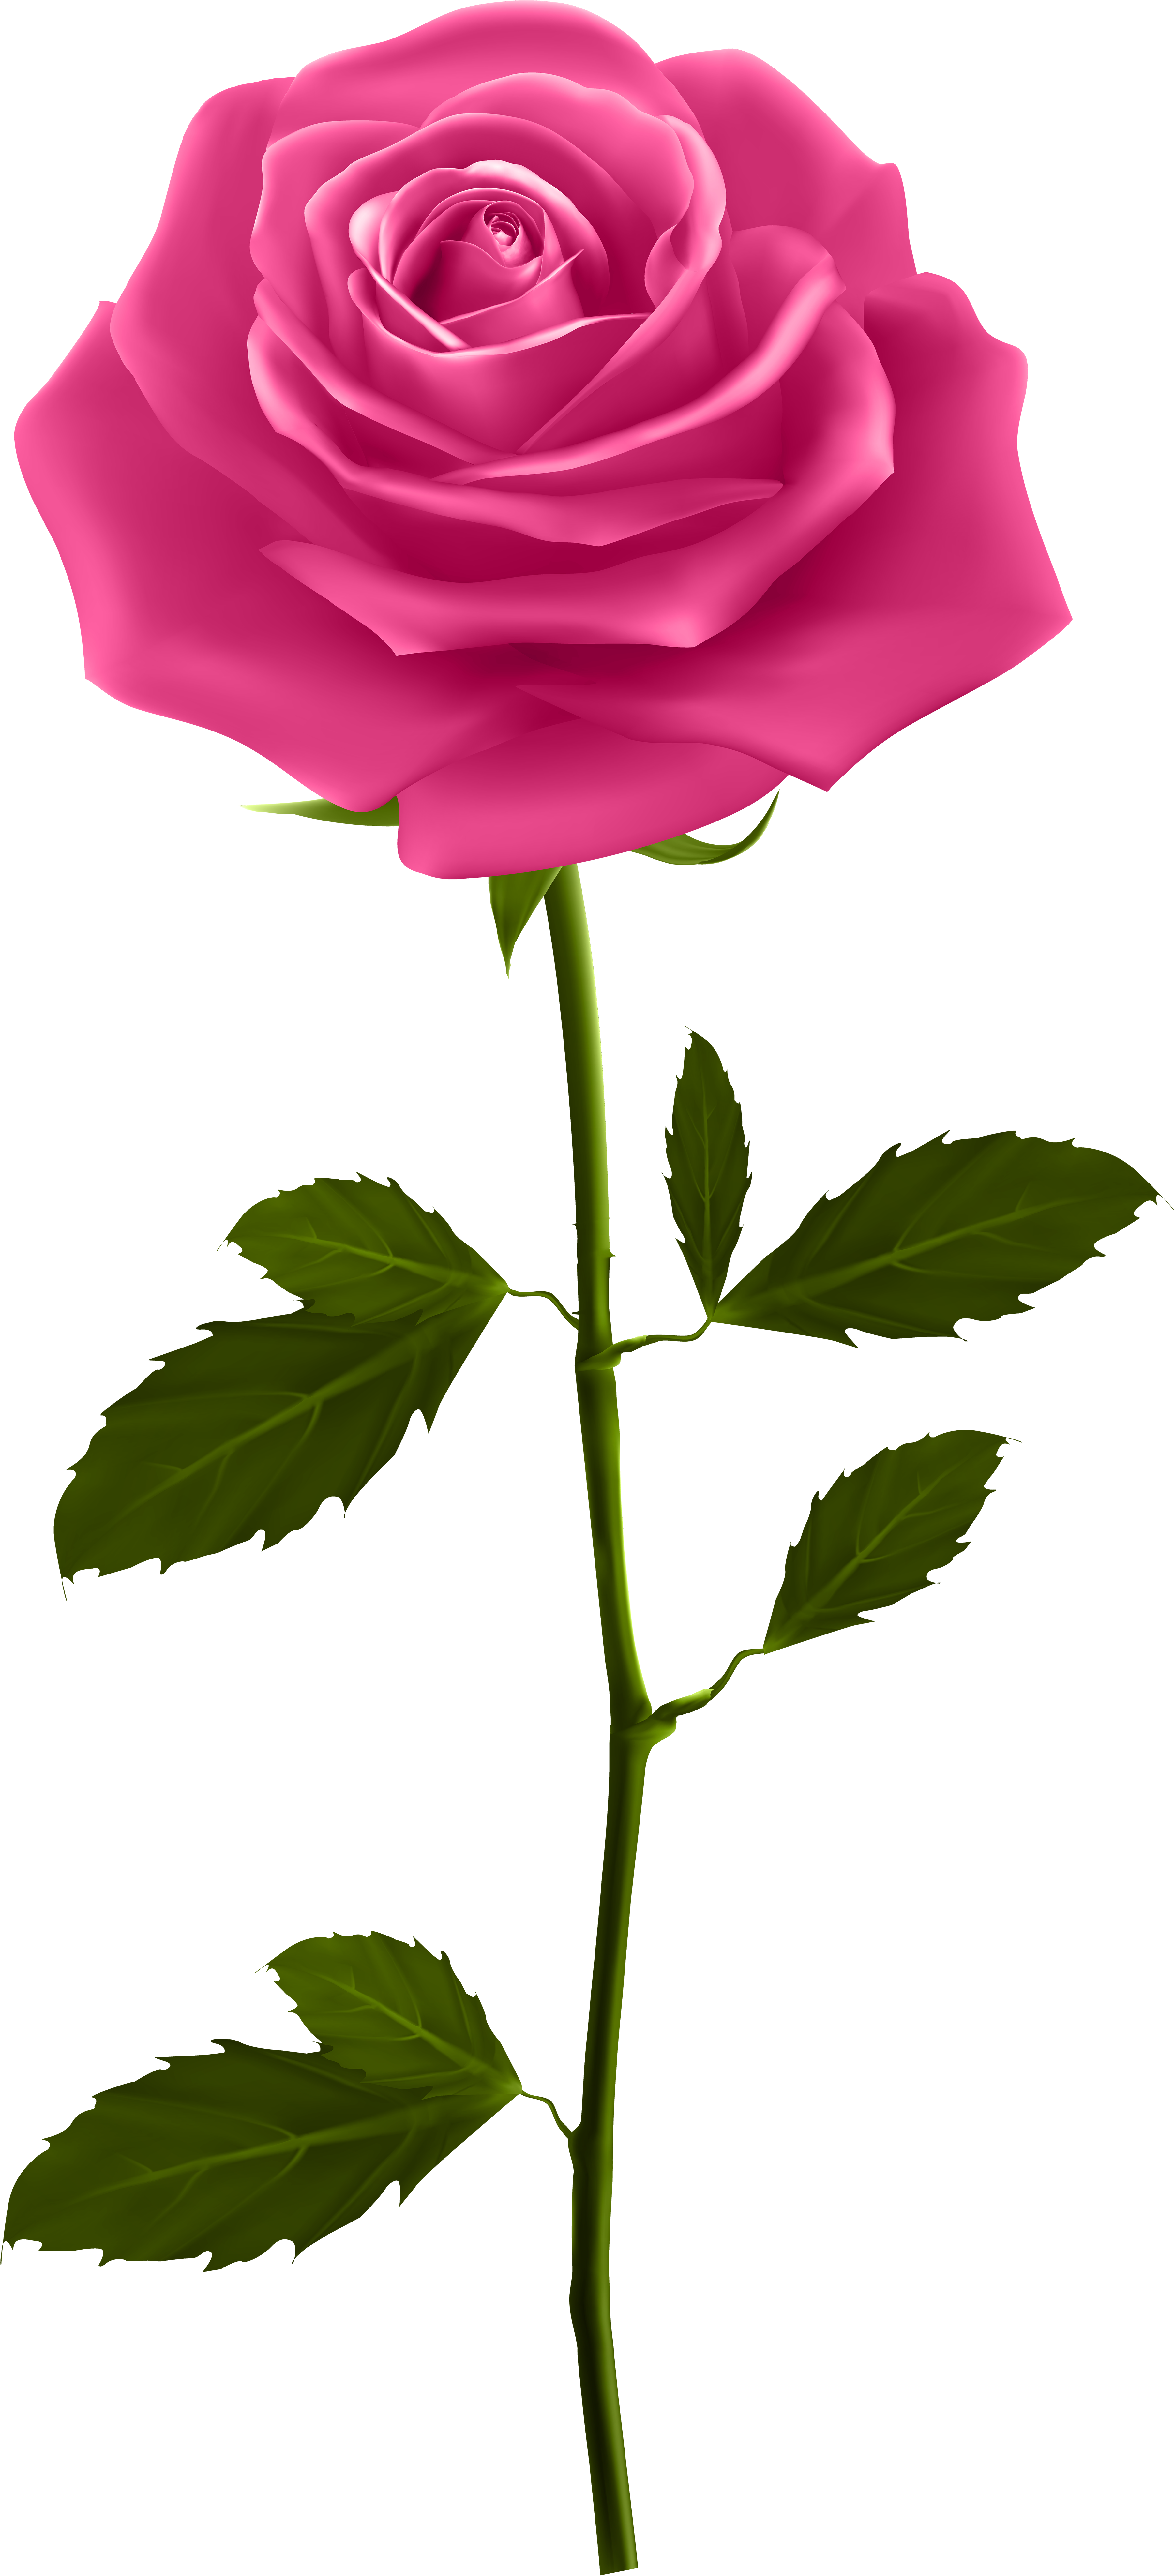 A Pink Rose With Green Leaves